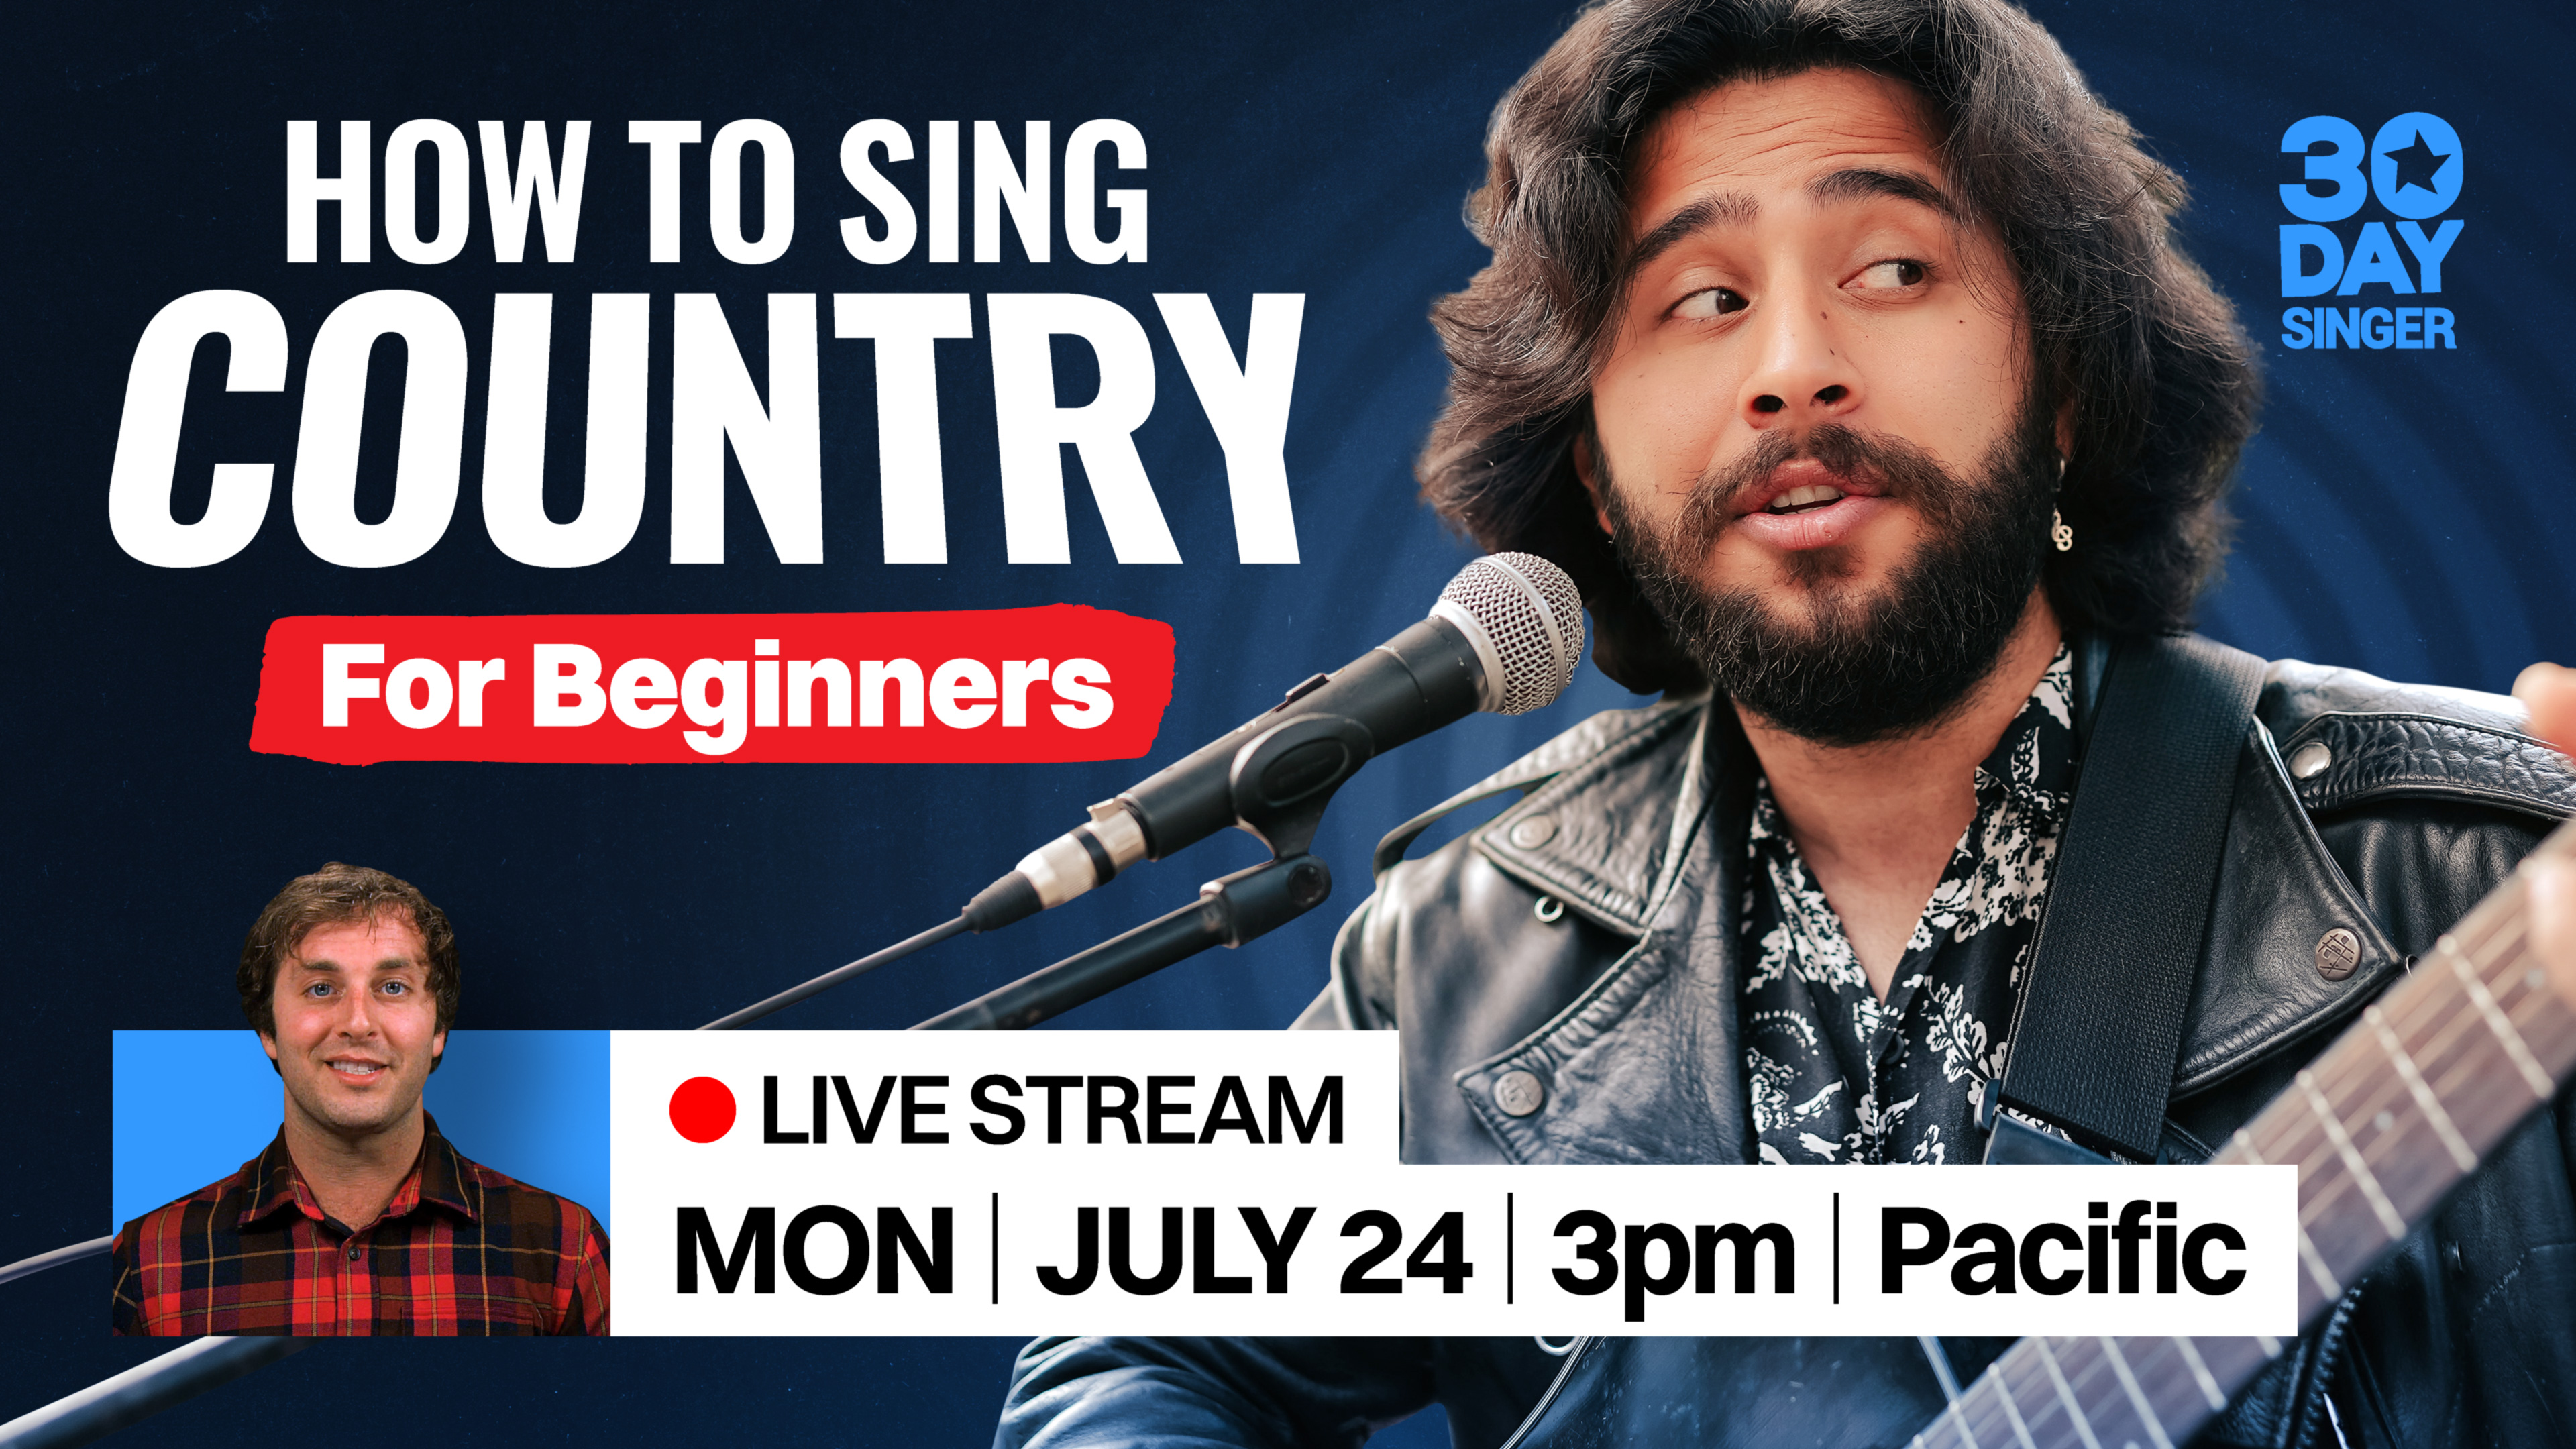 How To Sing Country for Beginners